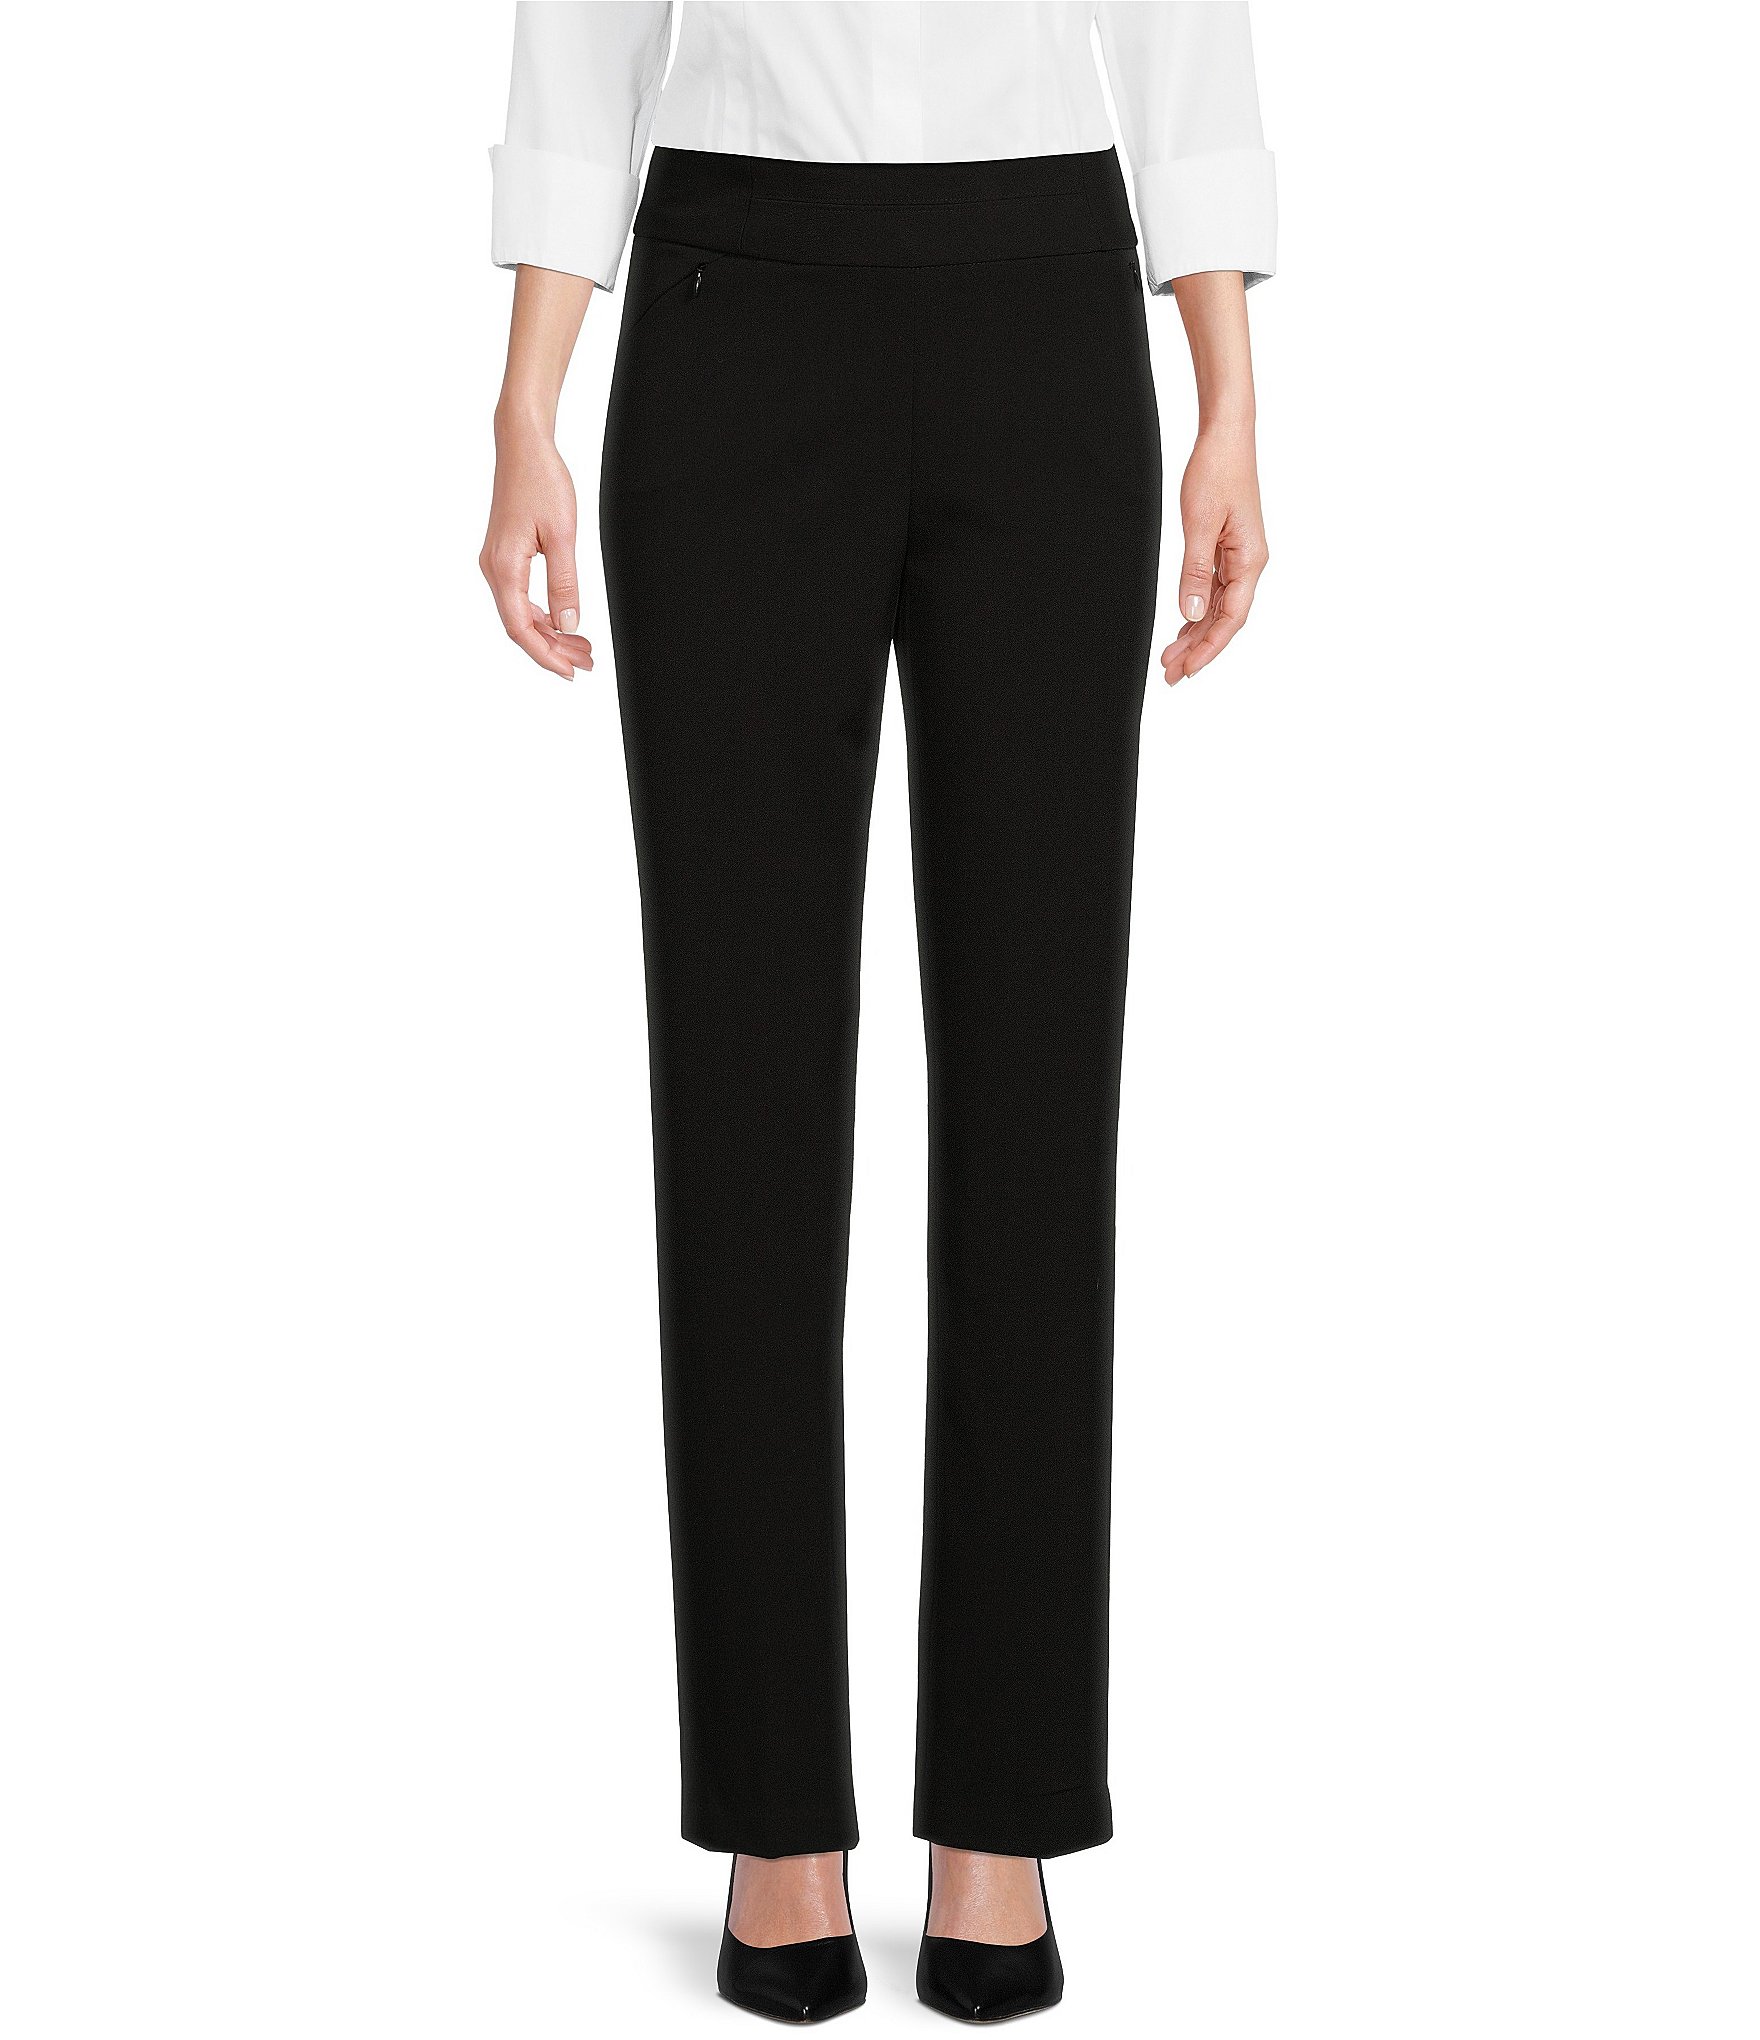 Buy black formal pant for women slim fit in India @ Limeroad